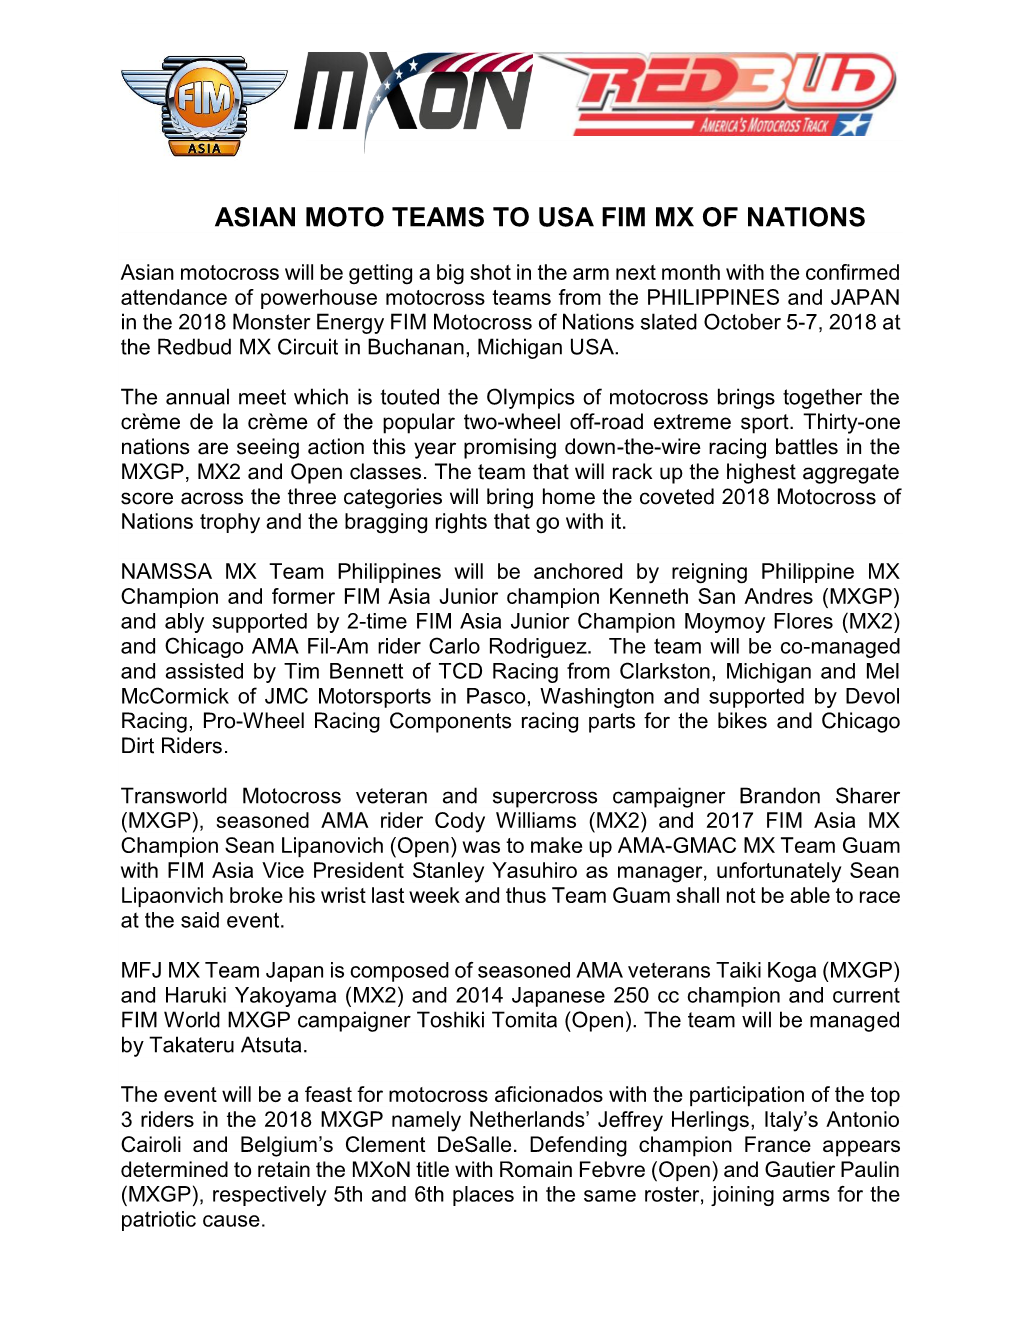 Asian Moto Teams to Usa Fim Mx of Nations